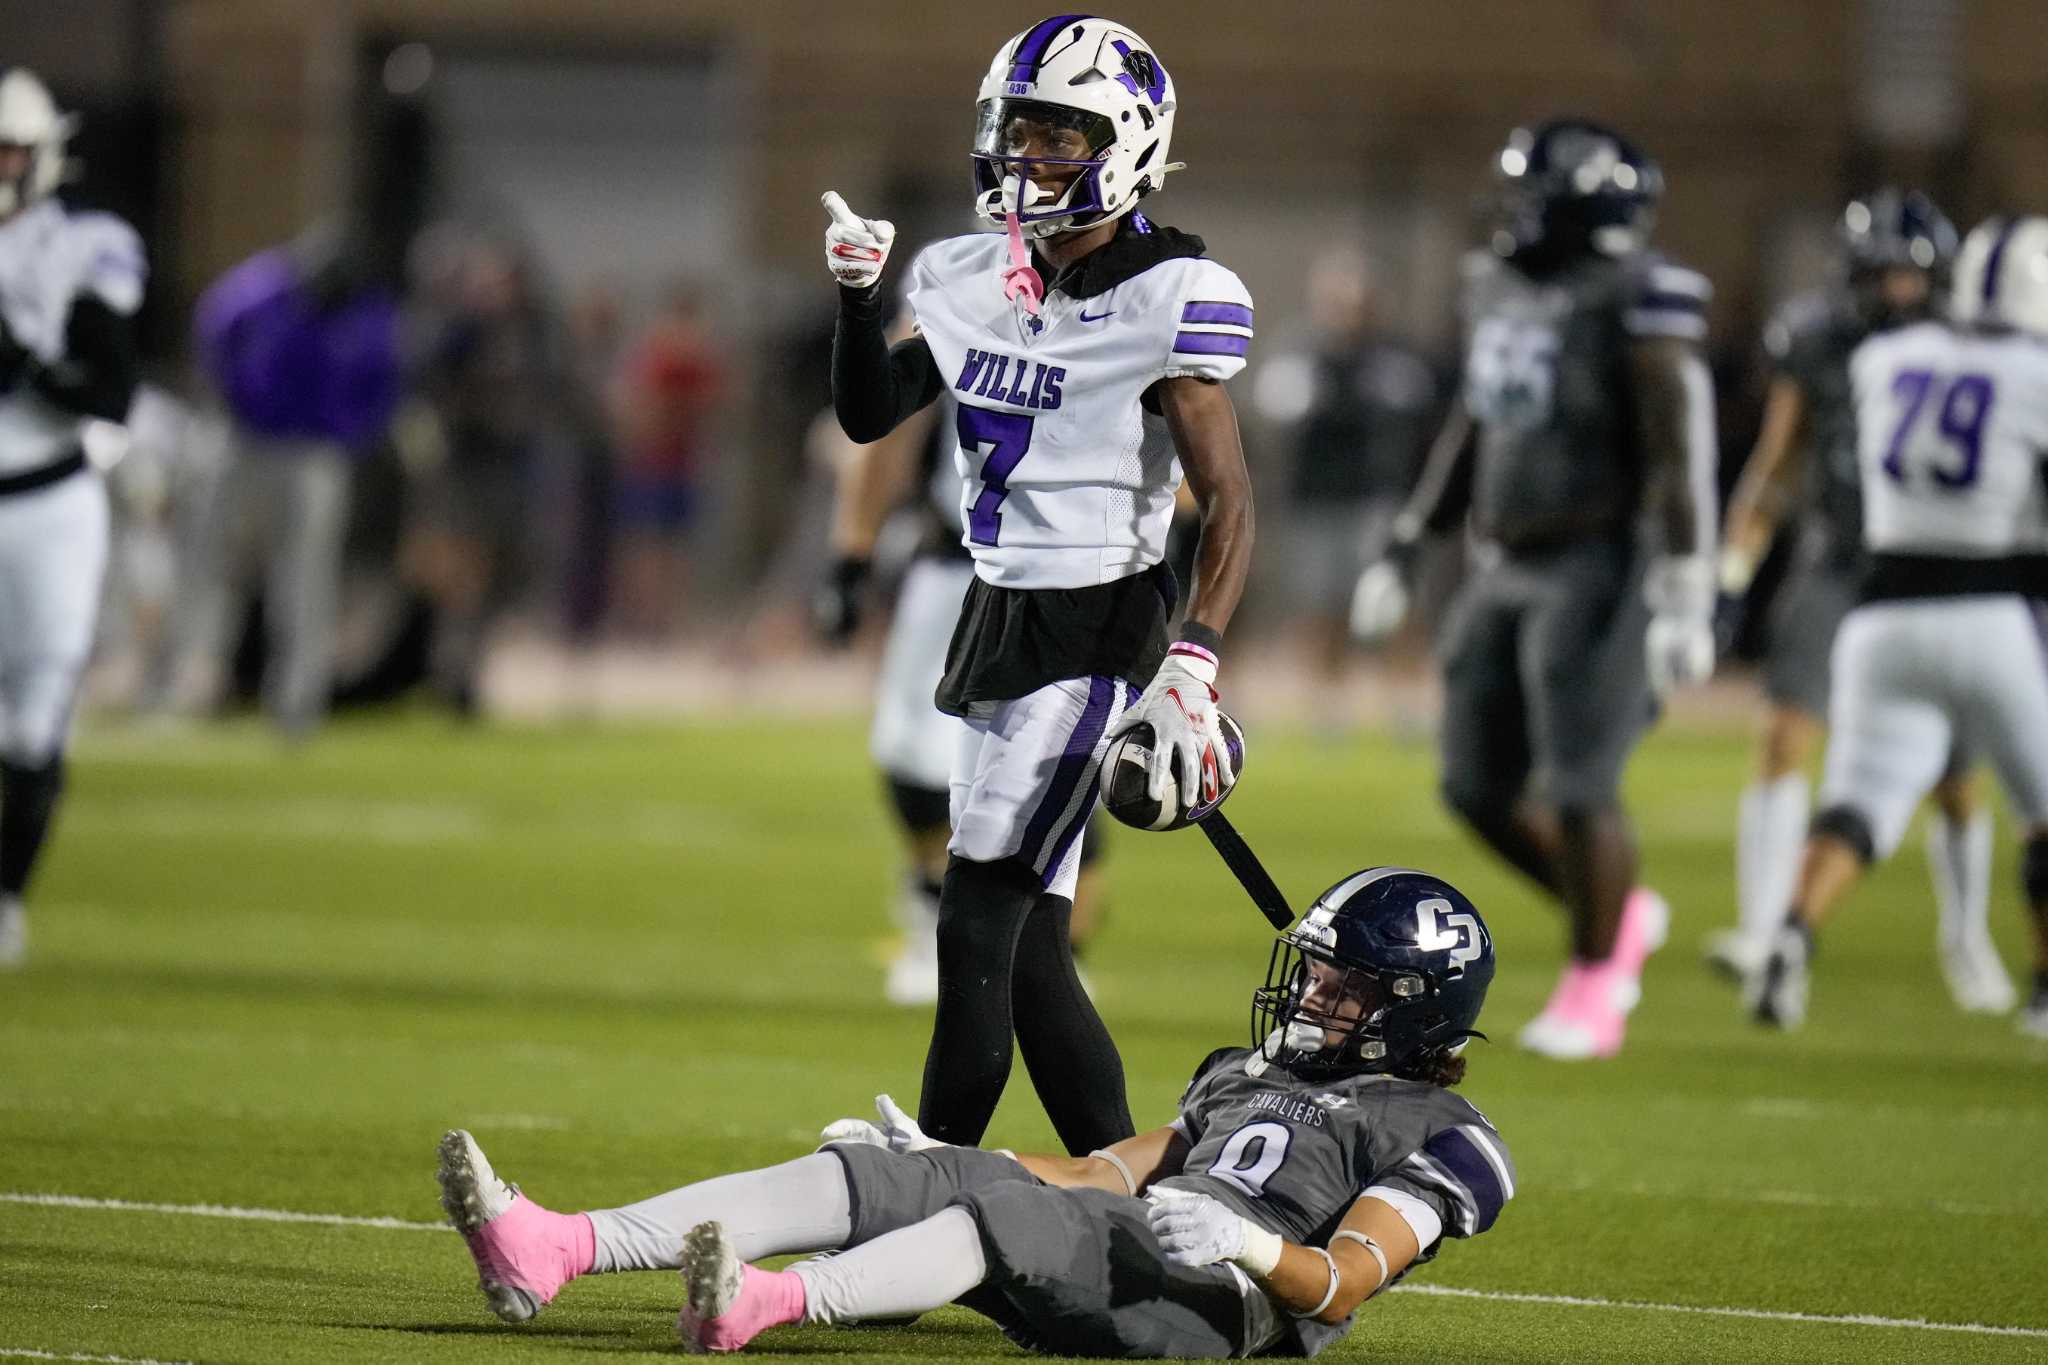 Jermaine Bishop Jr. a steady influence for talented Willis football